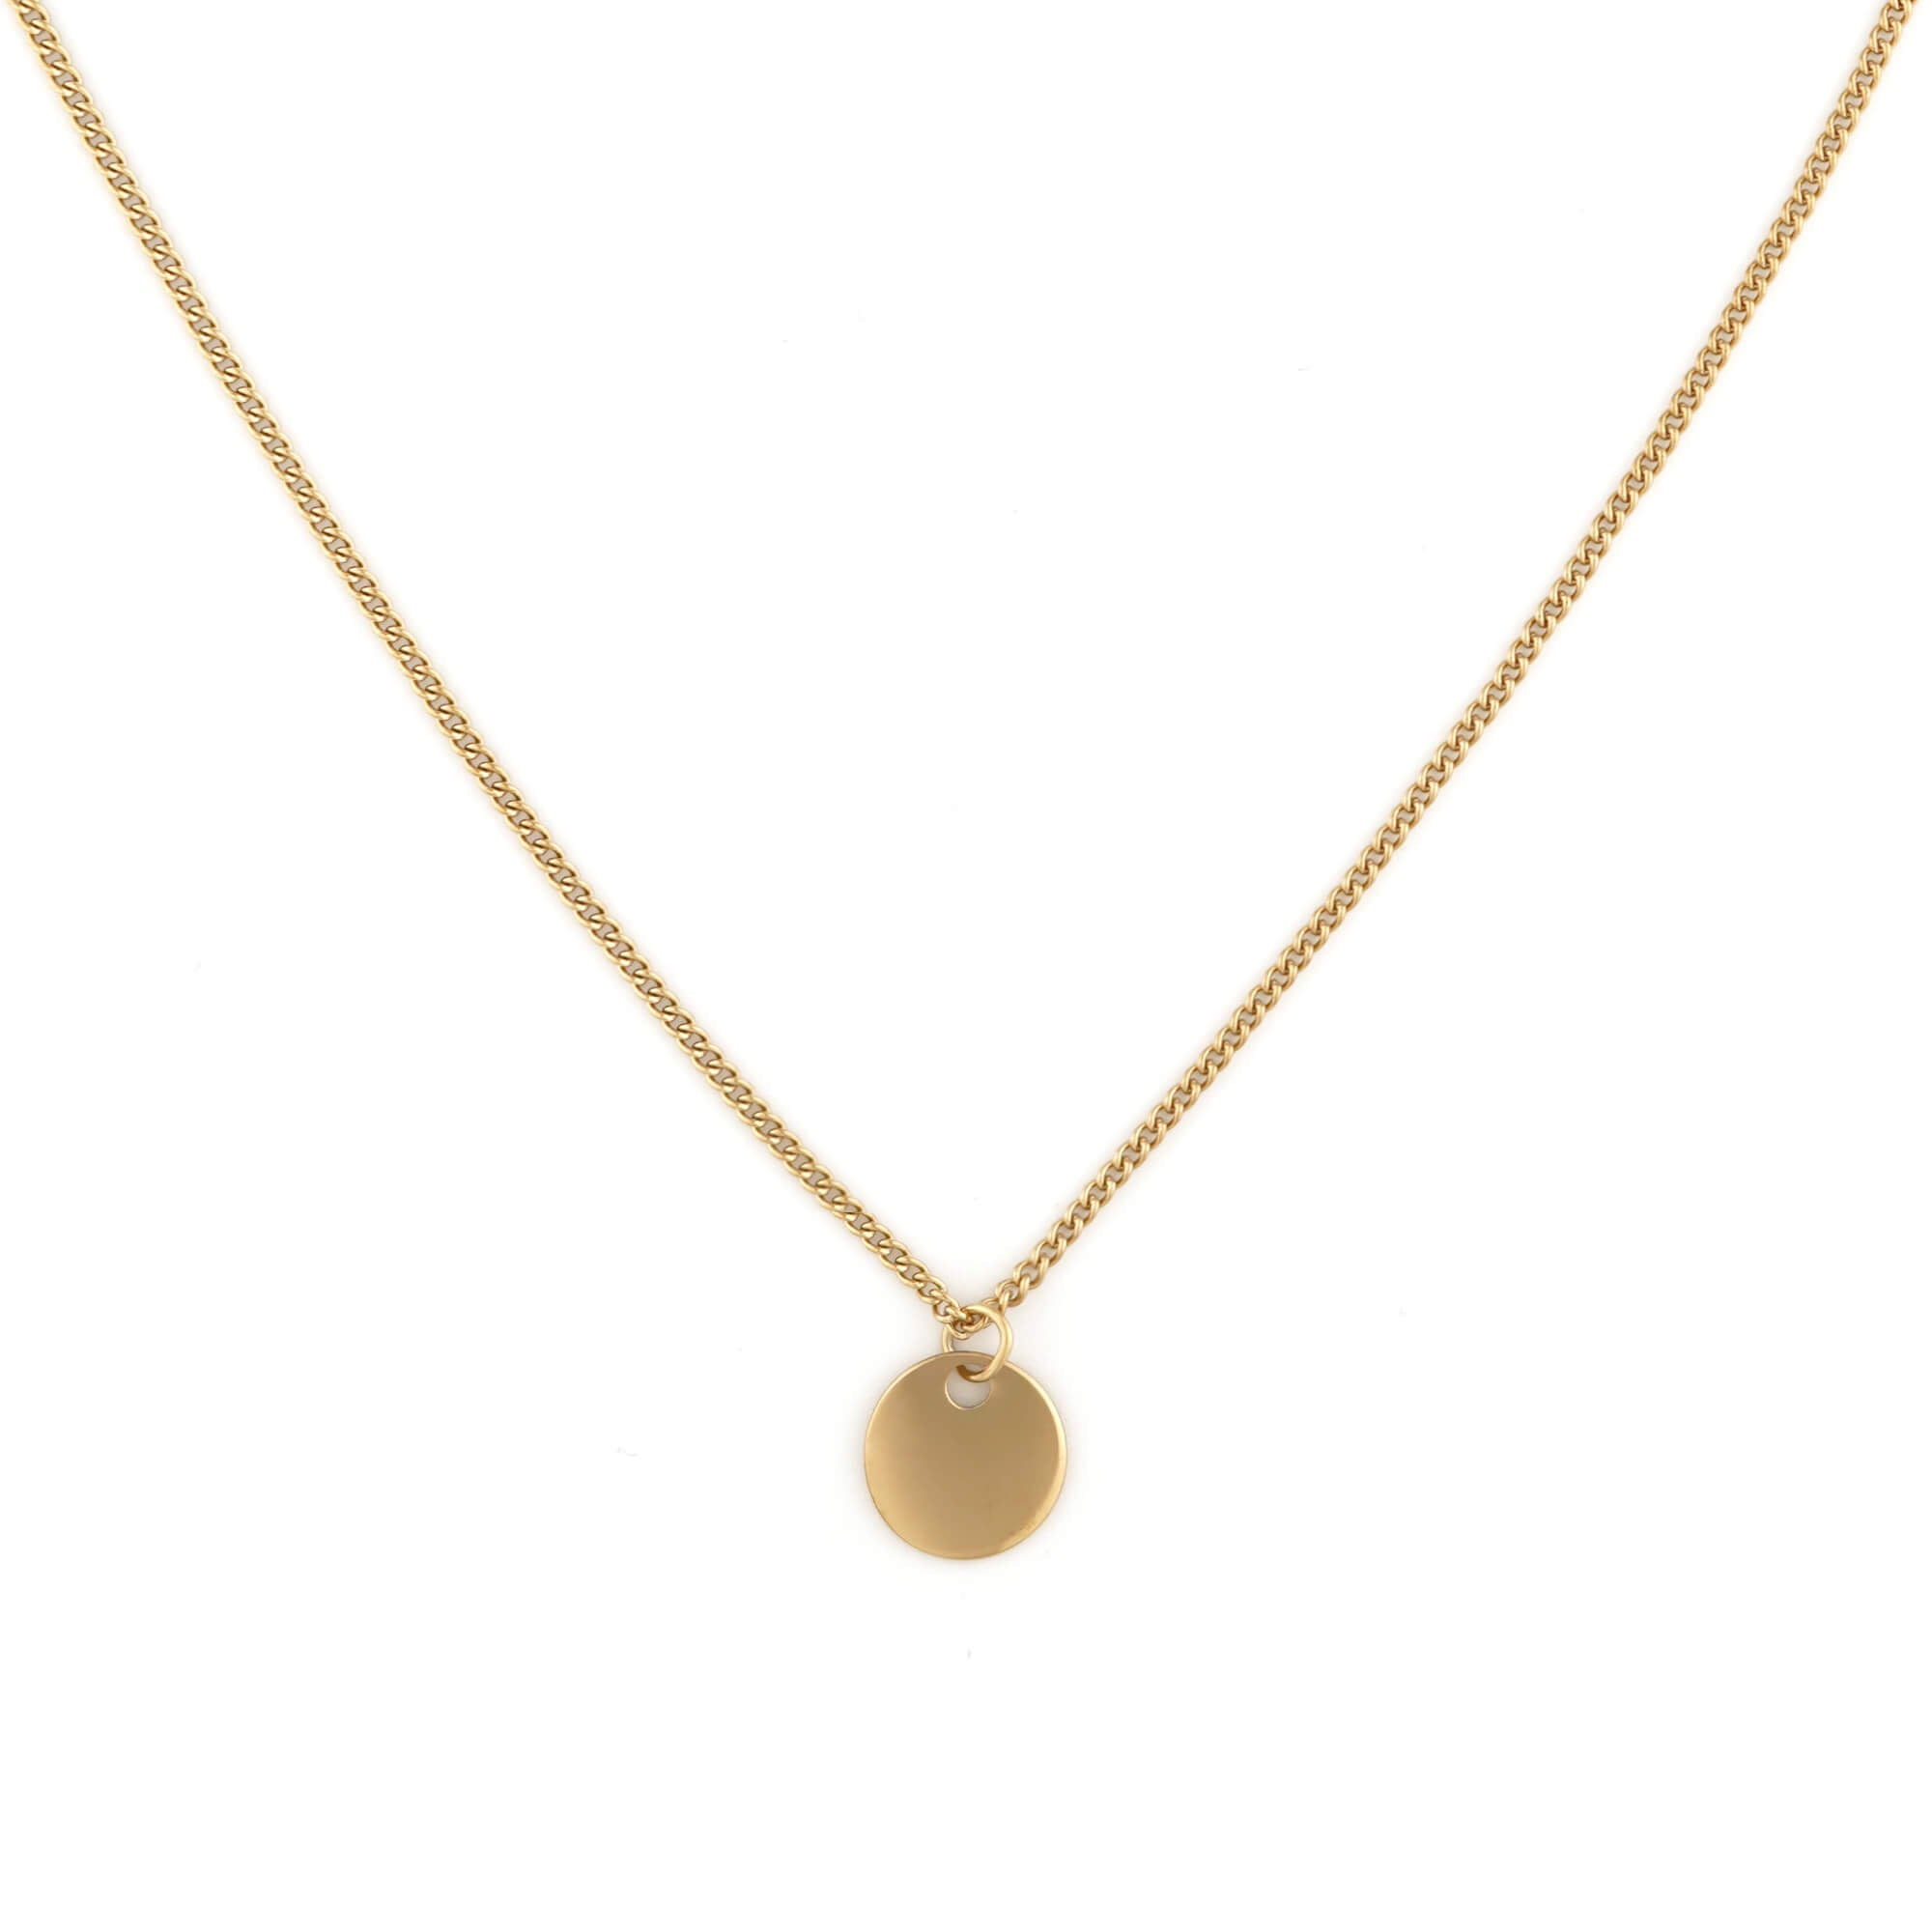 karna round rond small pendant necklace collier pendentif cercle chain 1.5mm mini fj watches stainless steel acier inoxydable women femme gold 14k or 